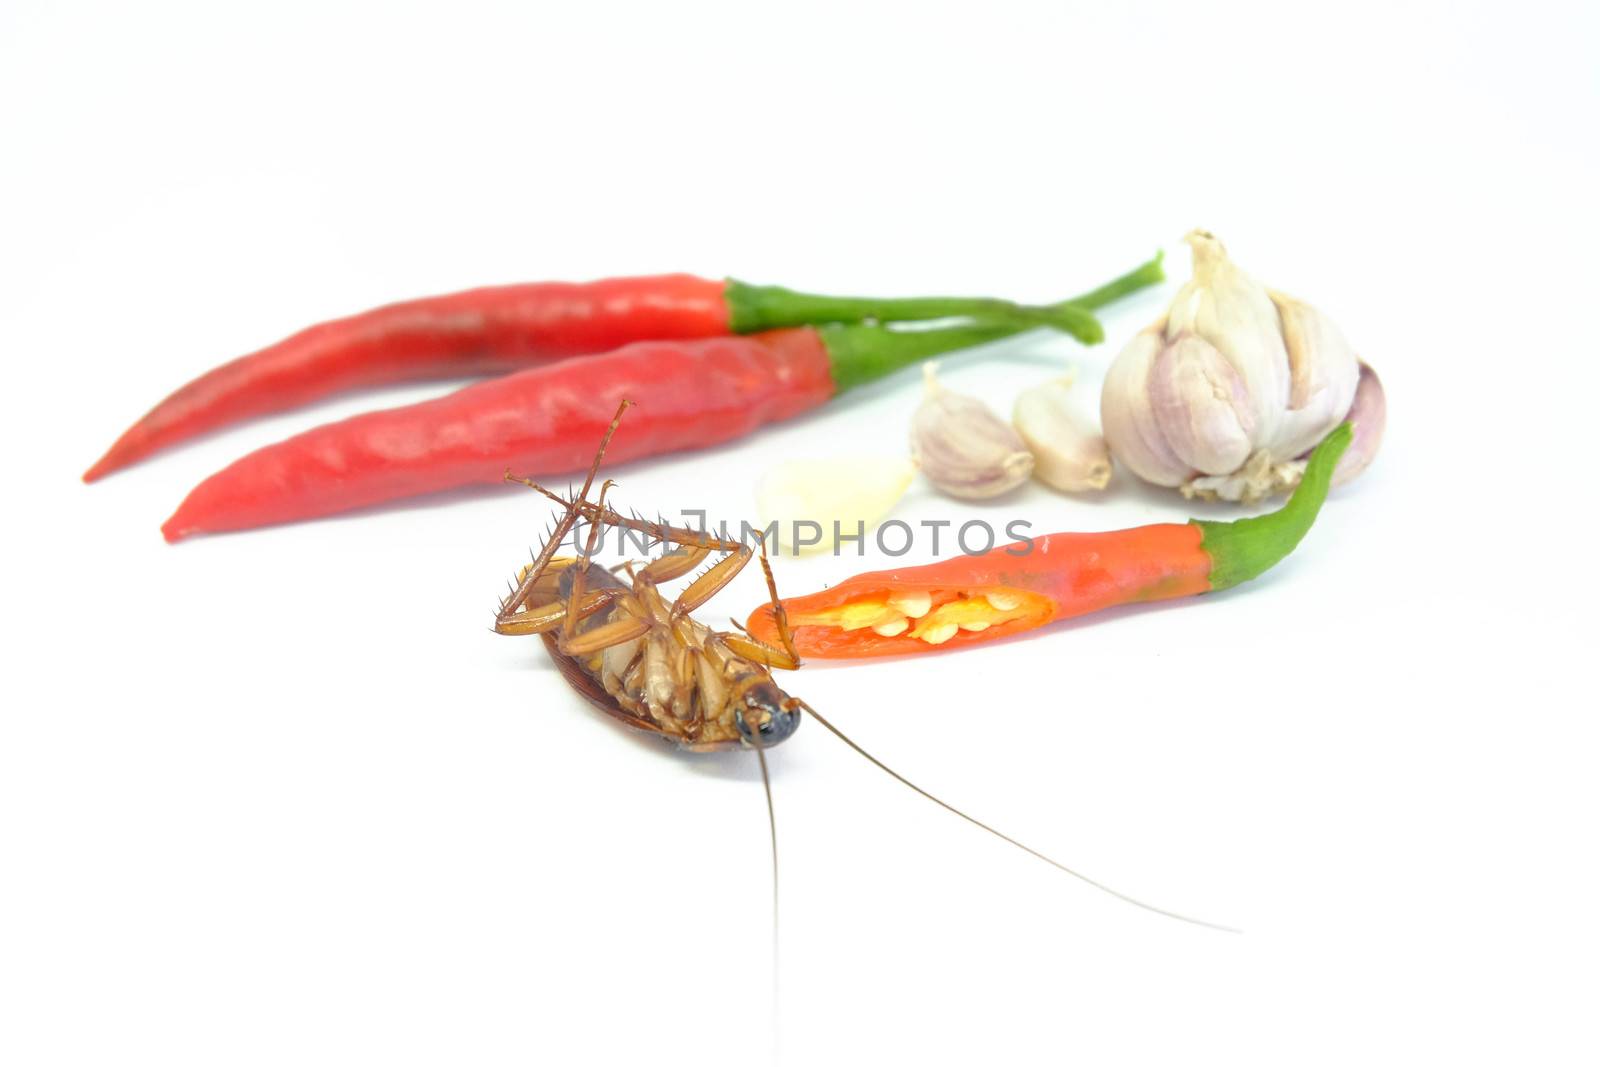 A garlic and chili can chase cockroaches,Close up cockroach chili and garlic on isolated style.